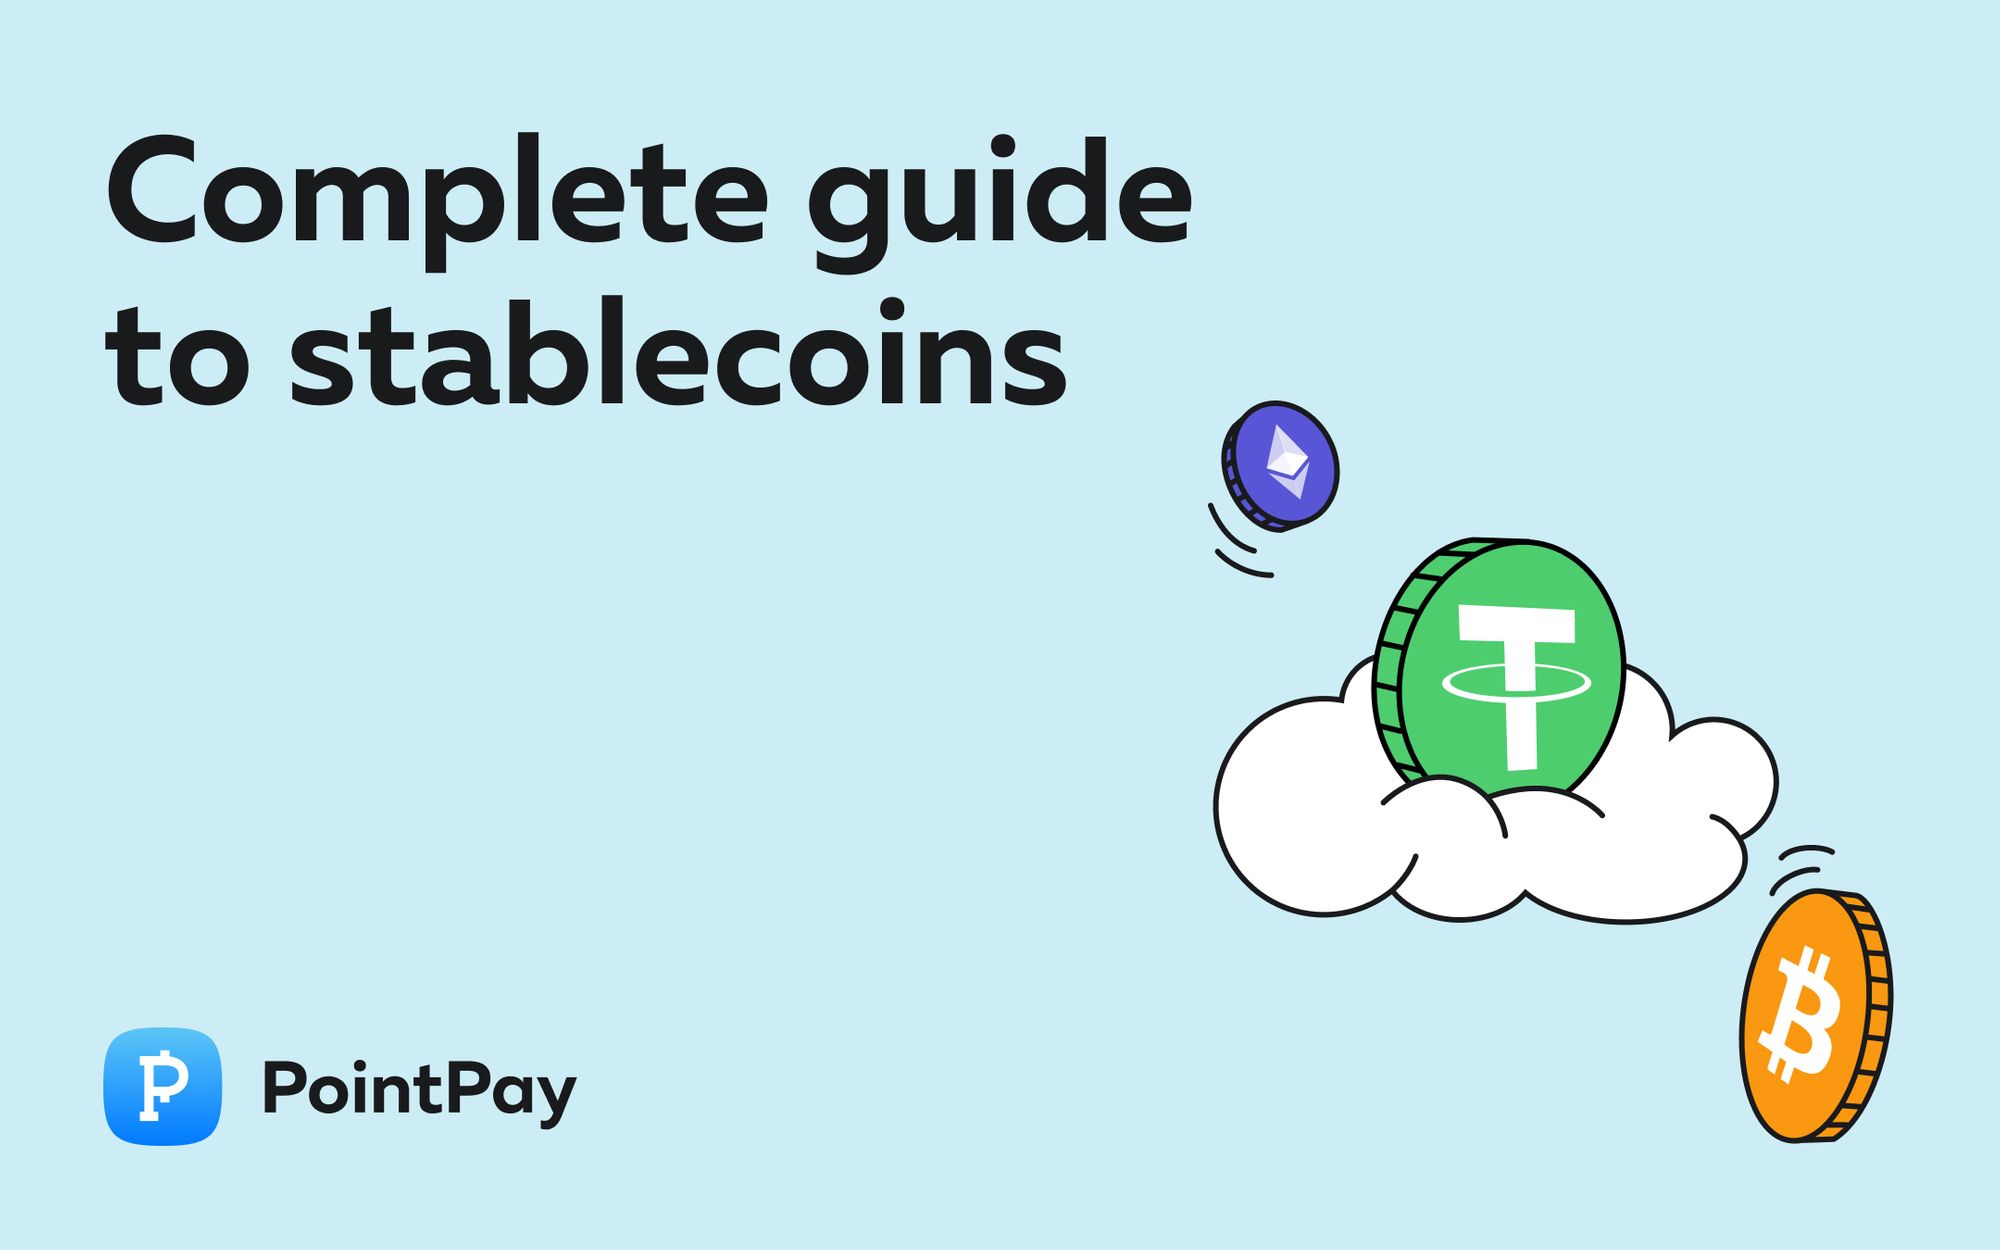 What is a stablecoin?